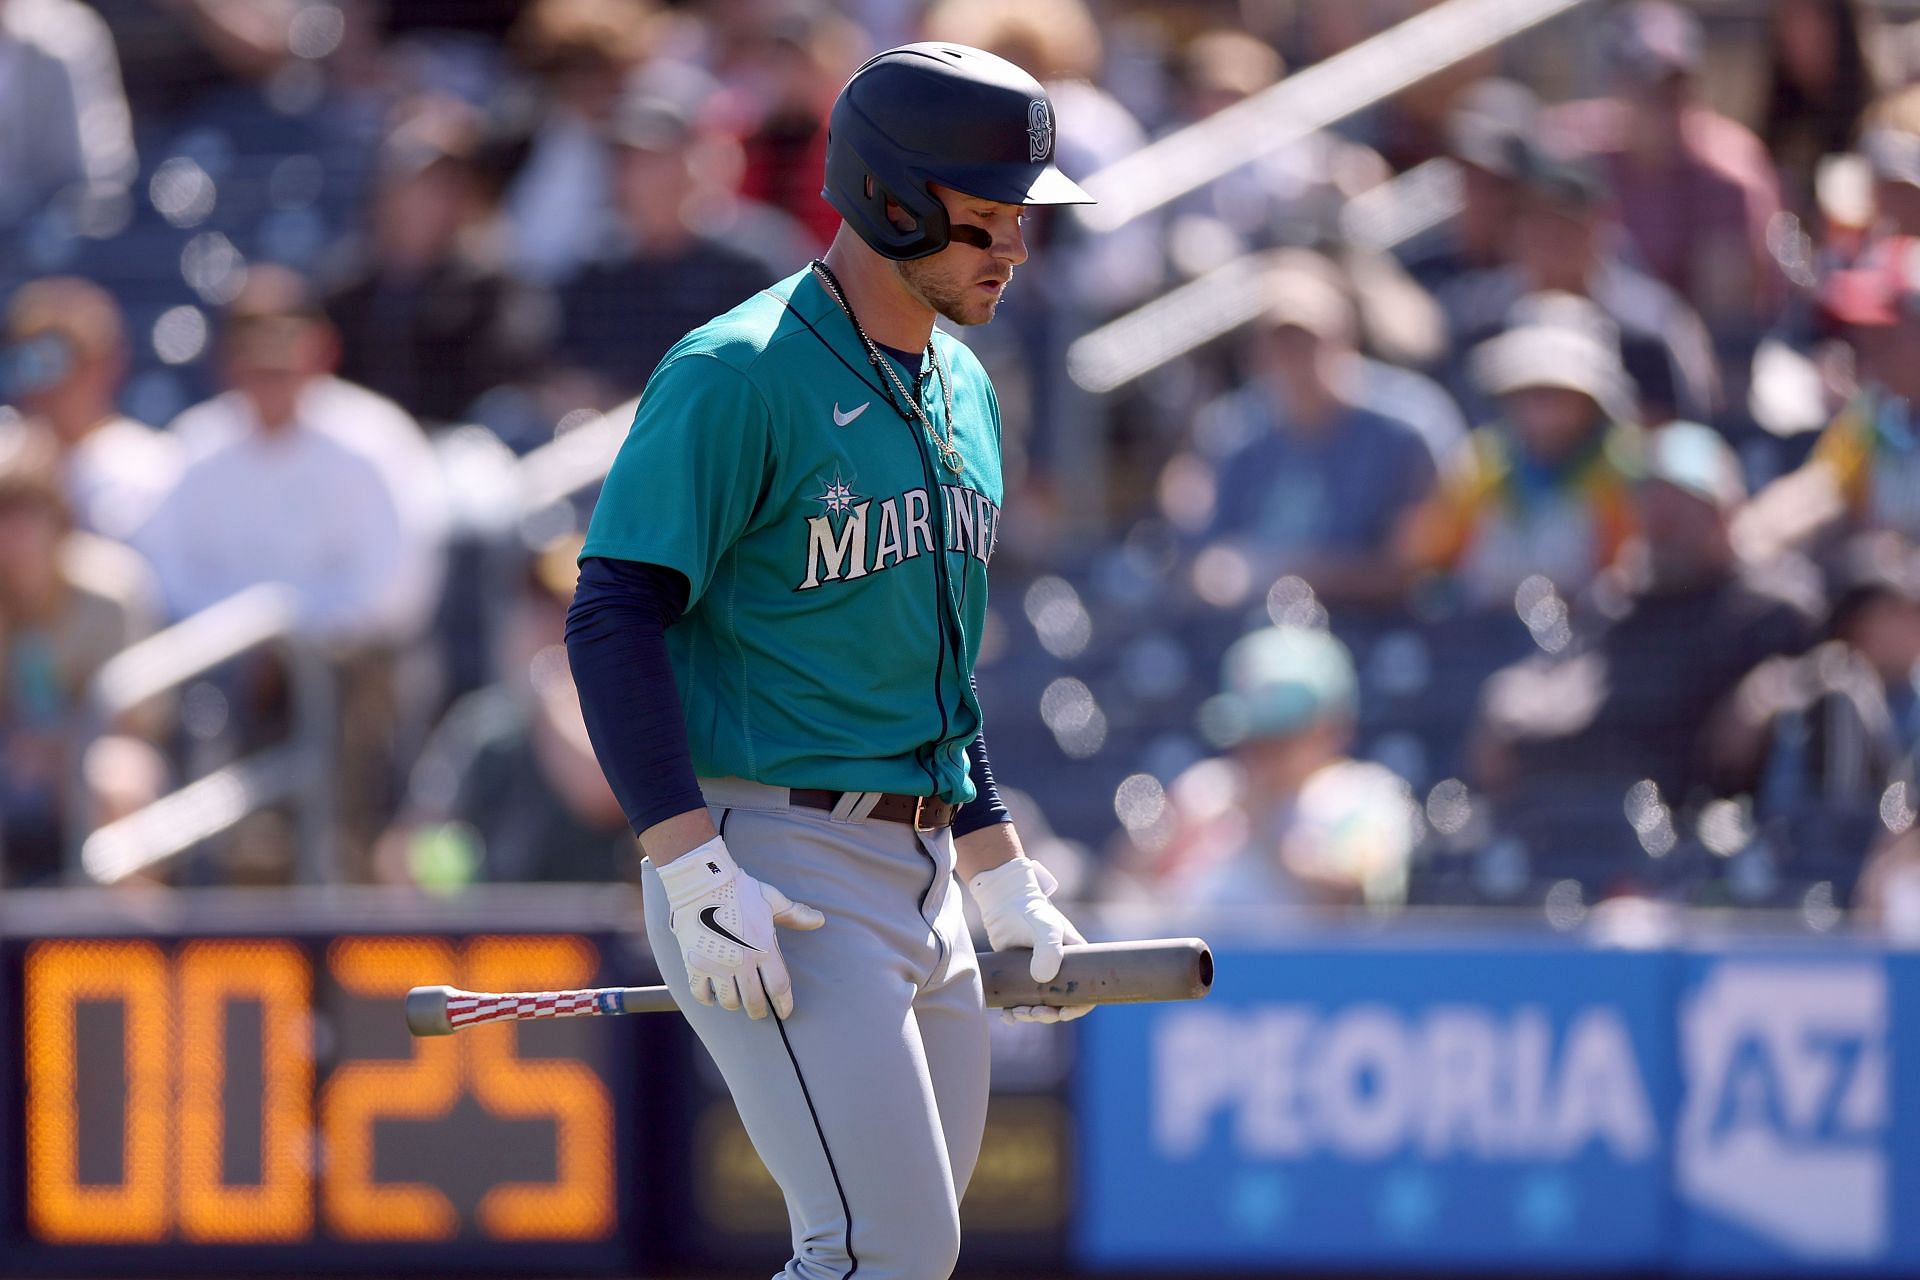 The Seattle Mariners are getting a new uniform look for spring